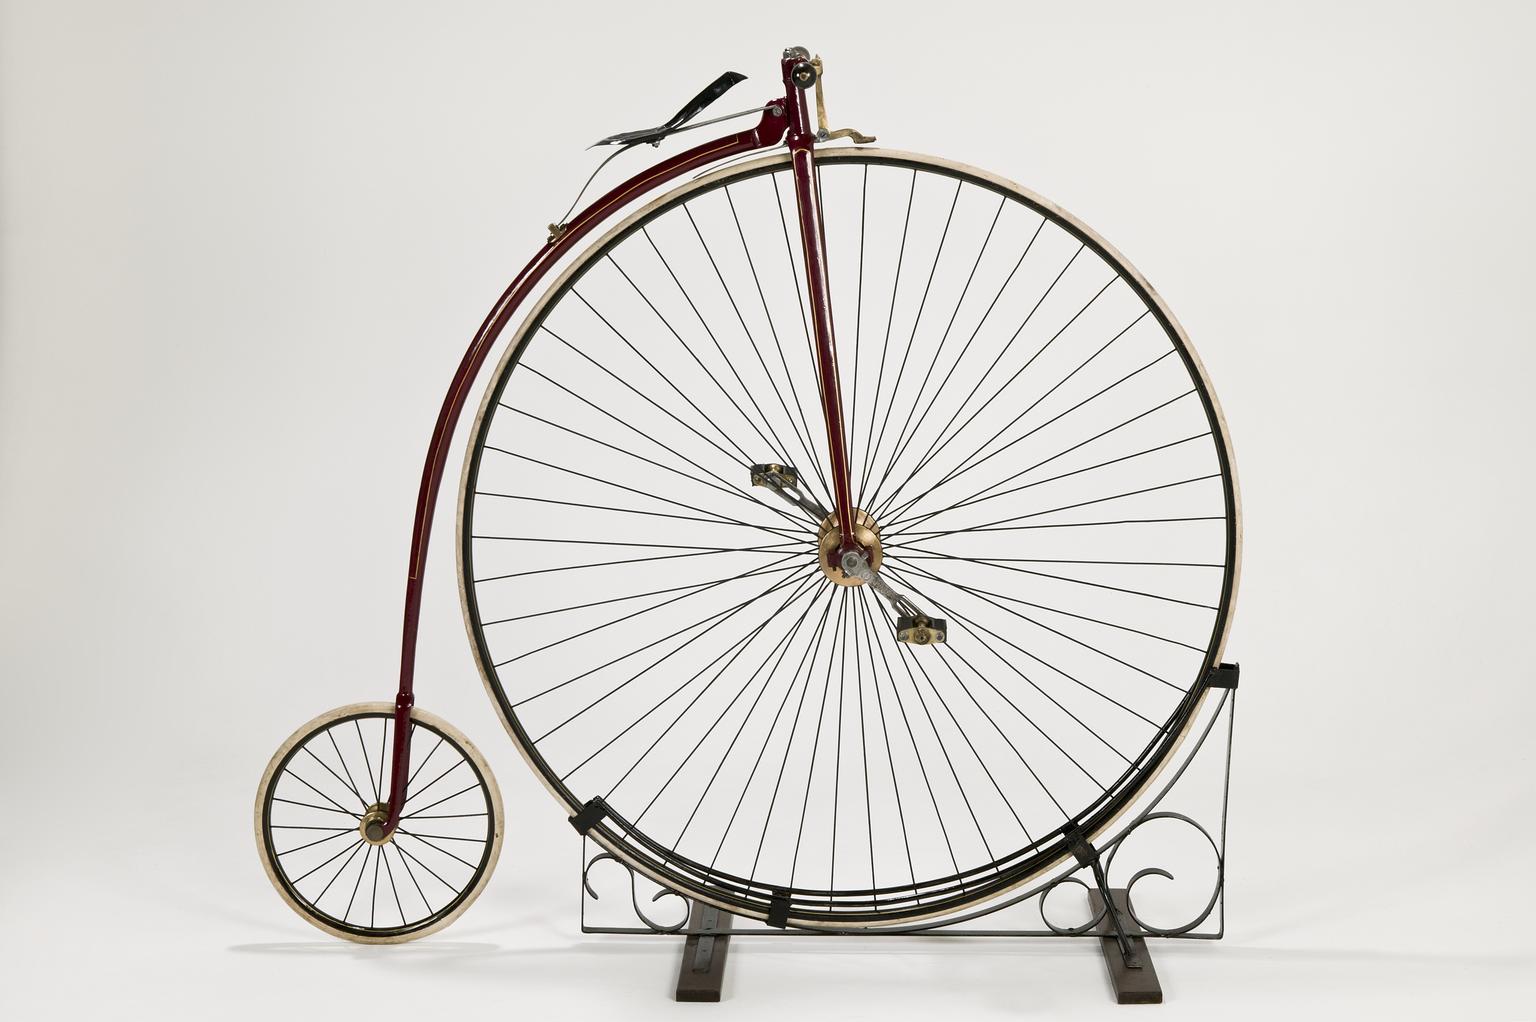 A penny farthing bicycle, with one large front wheel and a small back wheel